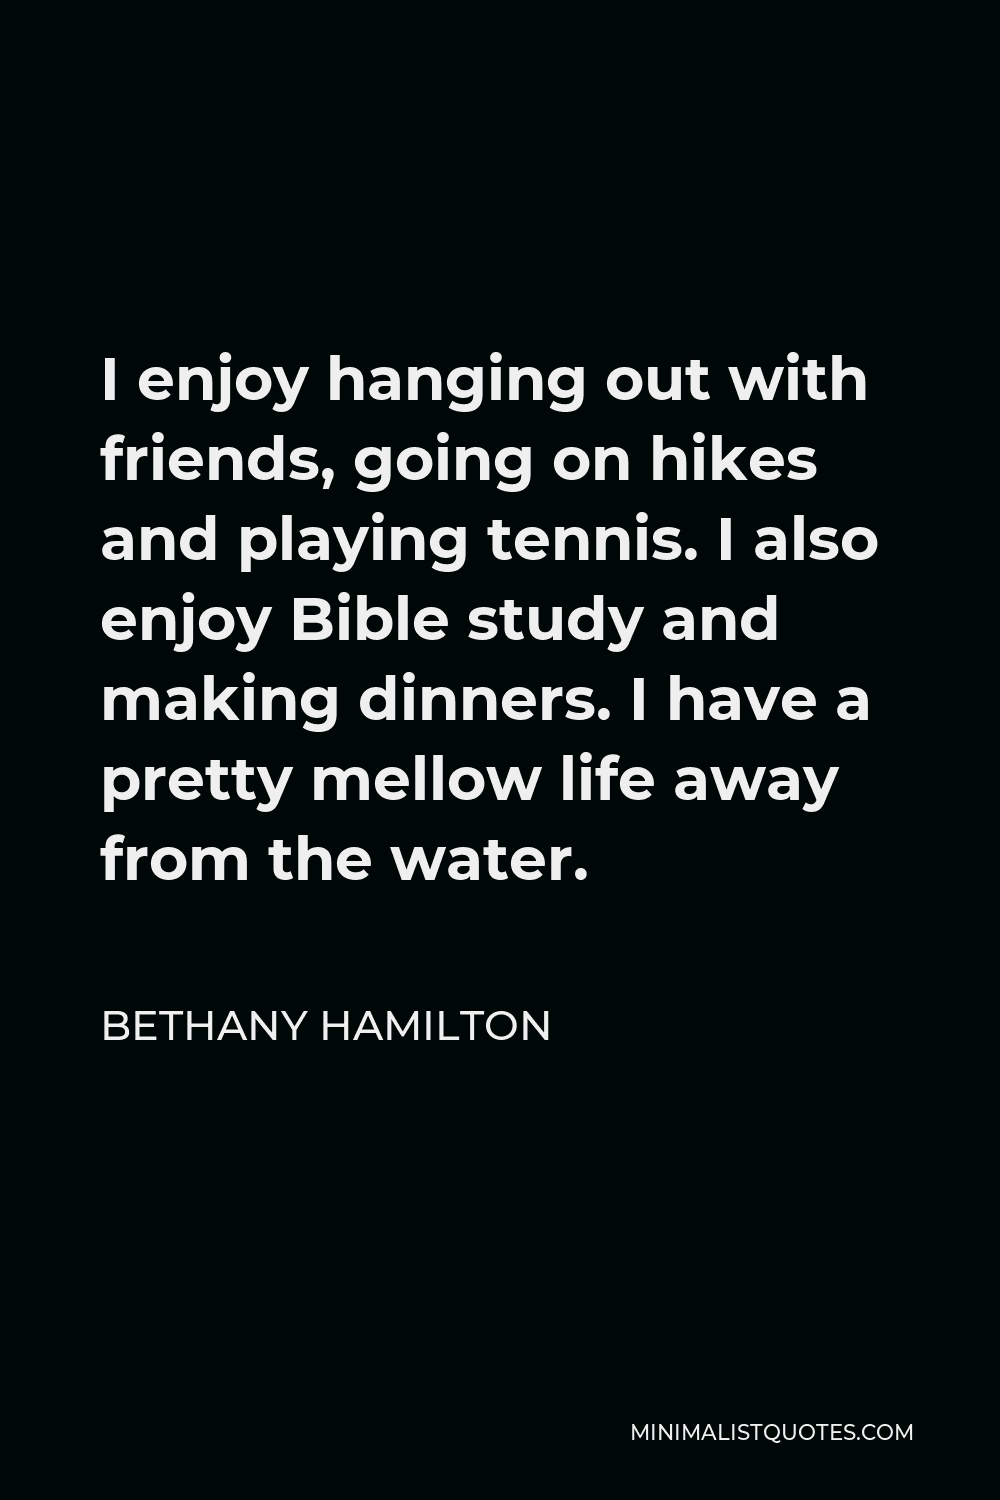 Bethany Hamilton Quote - I enjoy hanging out with friends, going on hikes and playing tennis. I also enjoy Bible study and making dinners. I have a pretty mellow life away from the water.